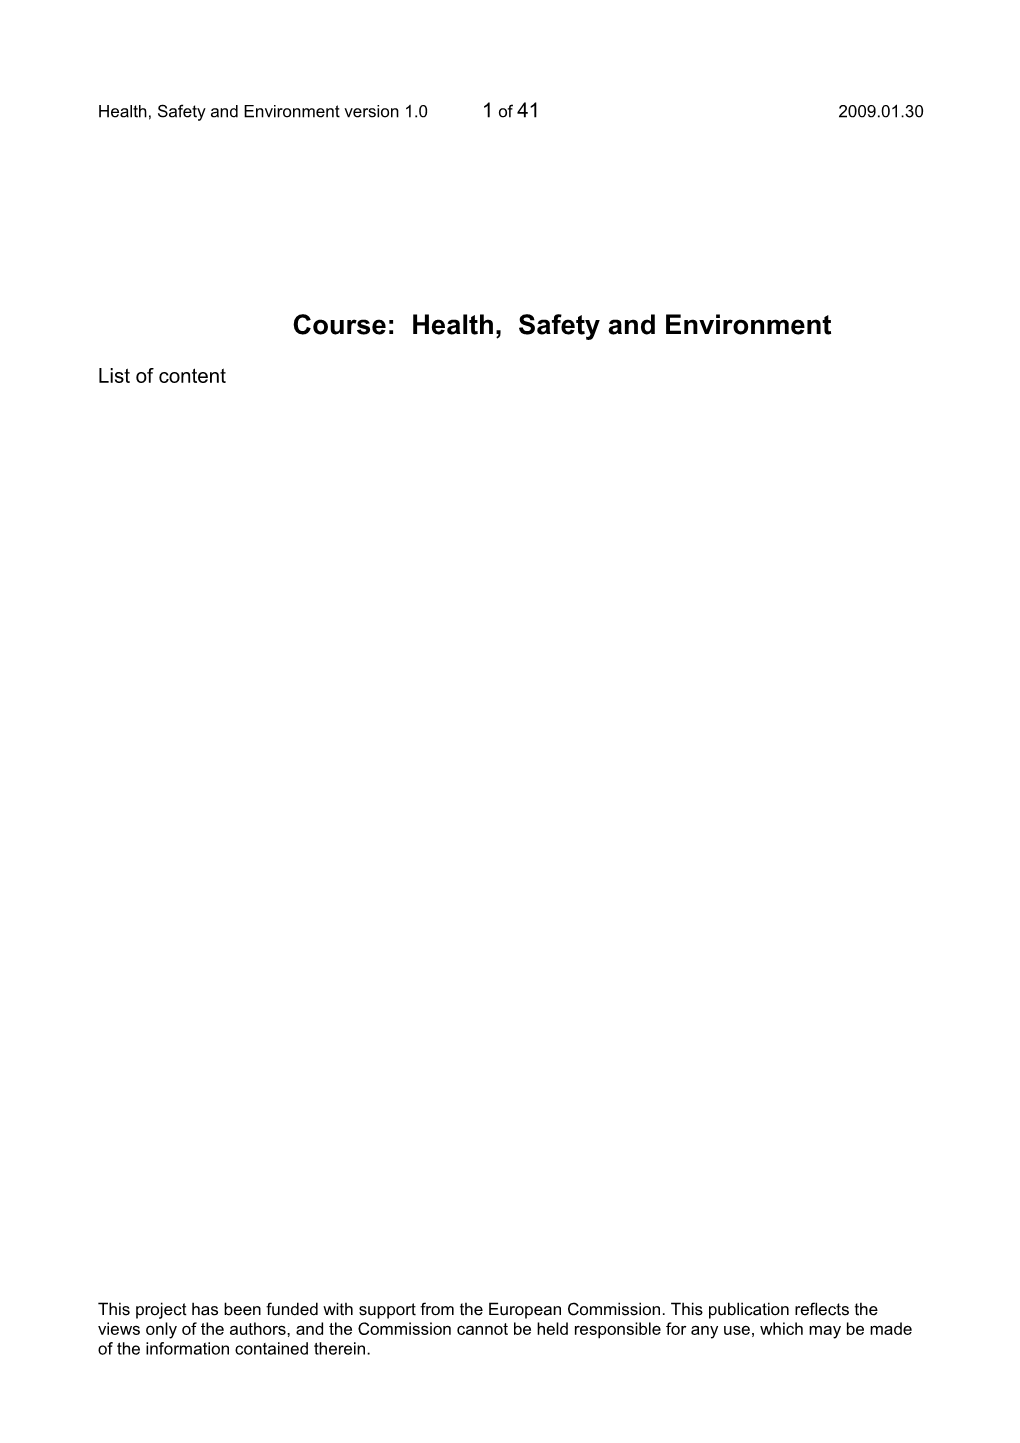 Health, Safety and Environment Version 1.0 1 of 43 2009.01.30